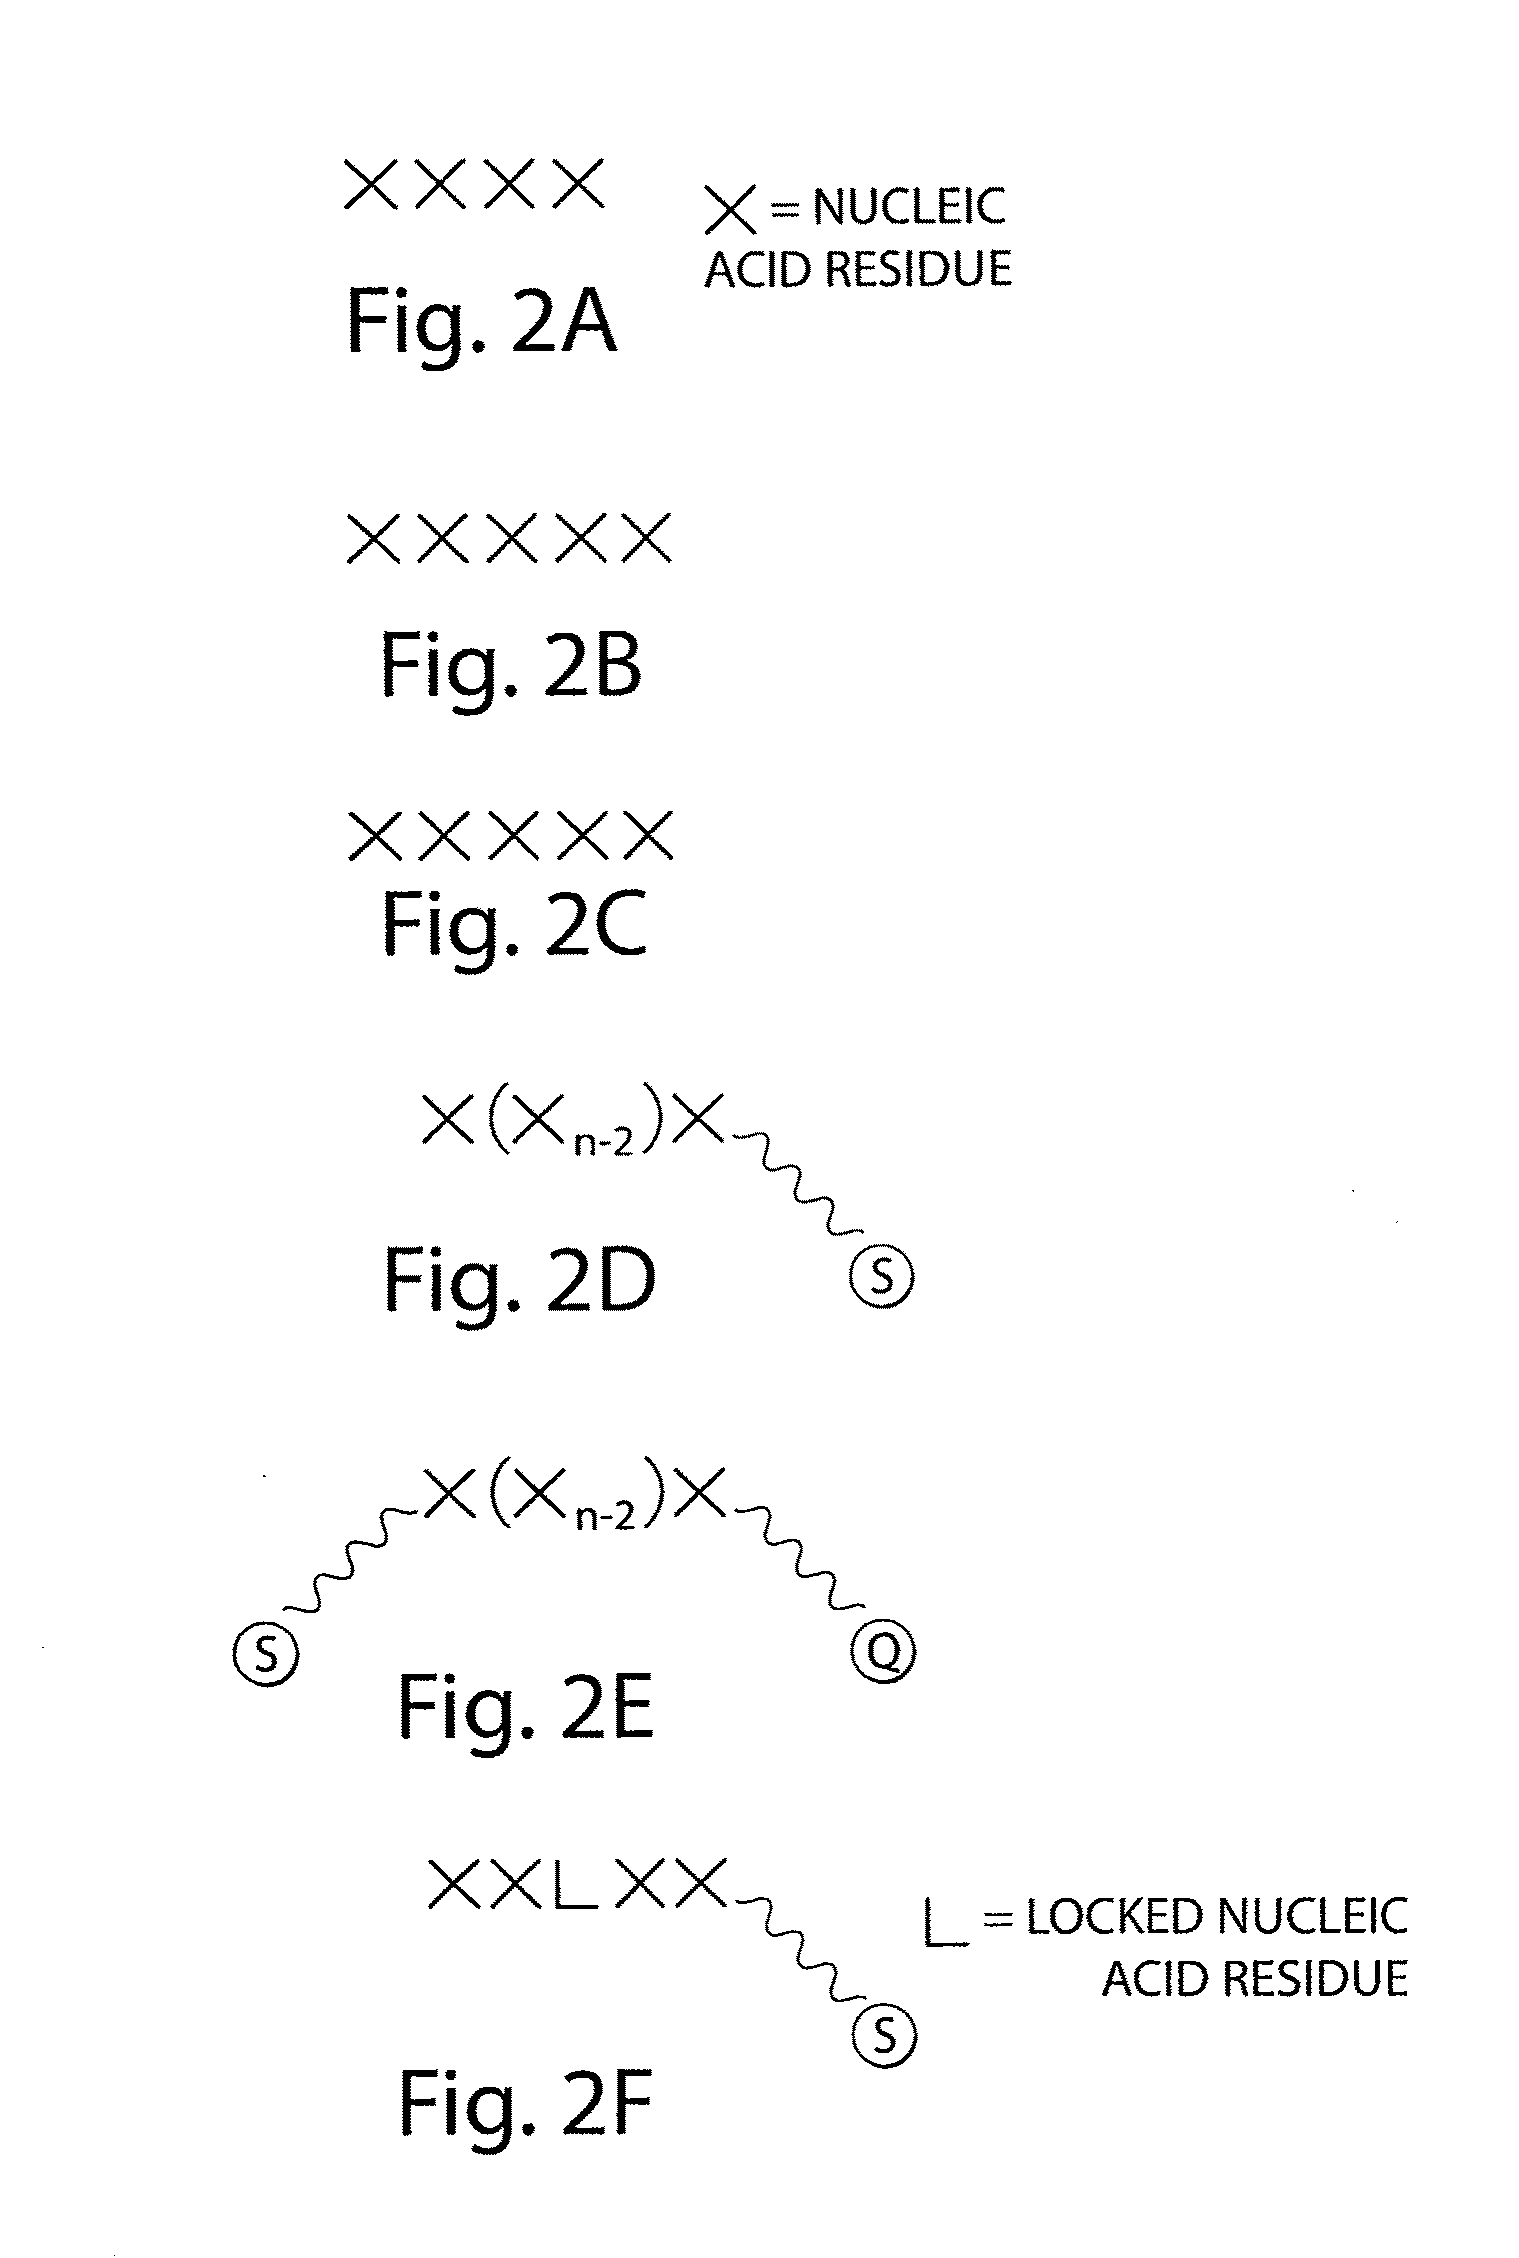 Systems and methods for nucleic acid sequencing